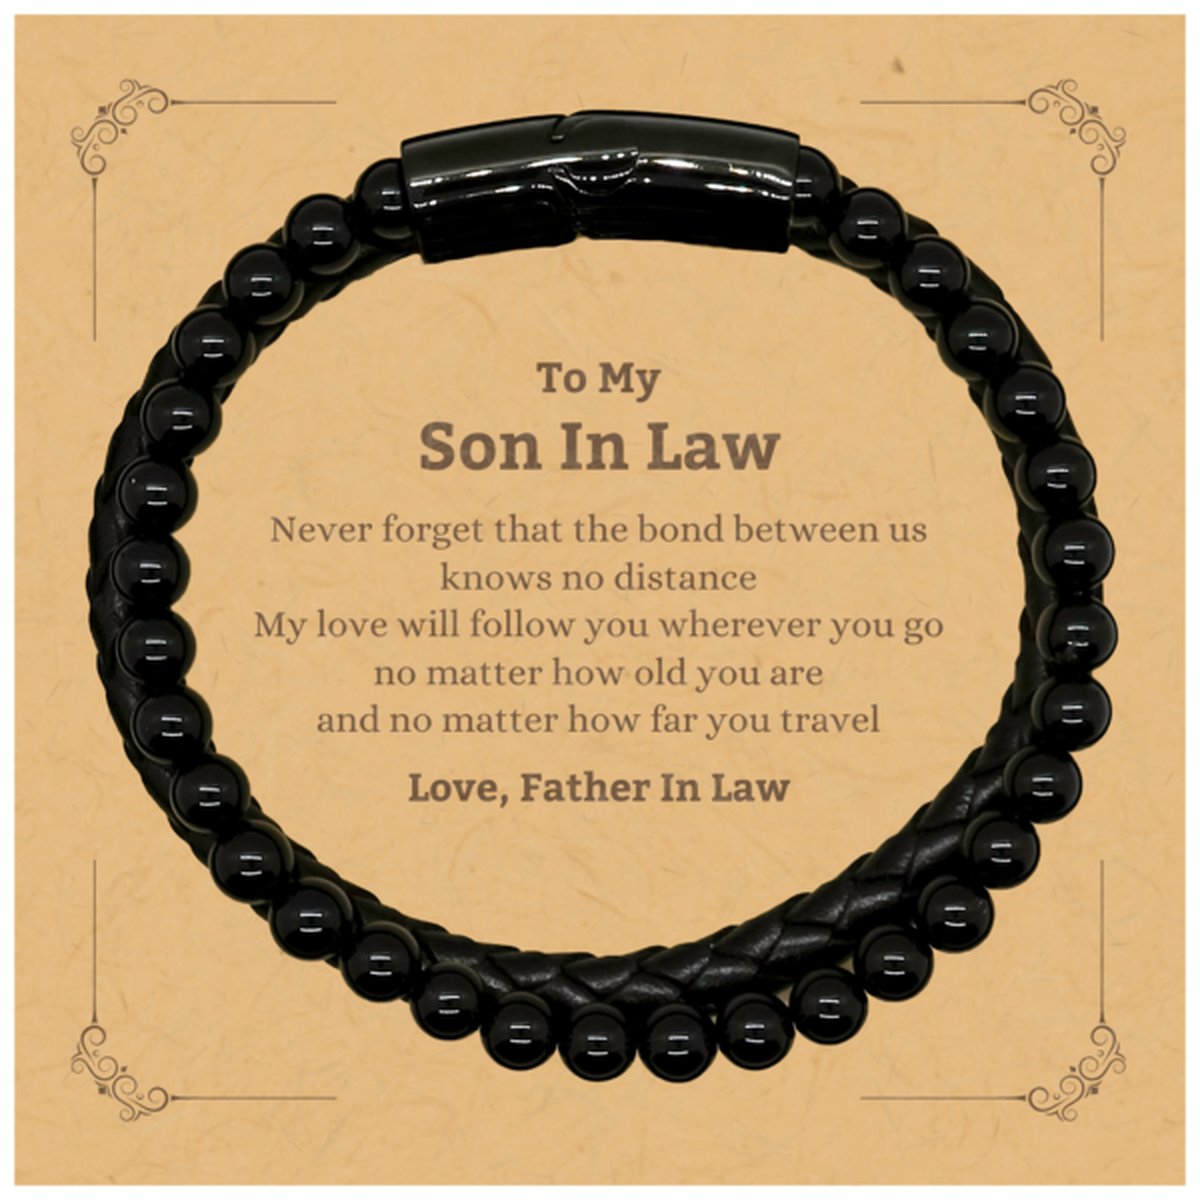 Son In Law Birthday Gifts from Father In Law, Adjustable Stone Leather Bracelets for Son In Law Christmas Graduation Unique Gifts Son In Law Never forget that the bond between us knows no distance. Love, Father In Law